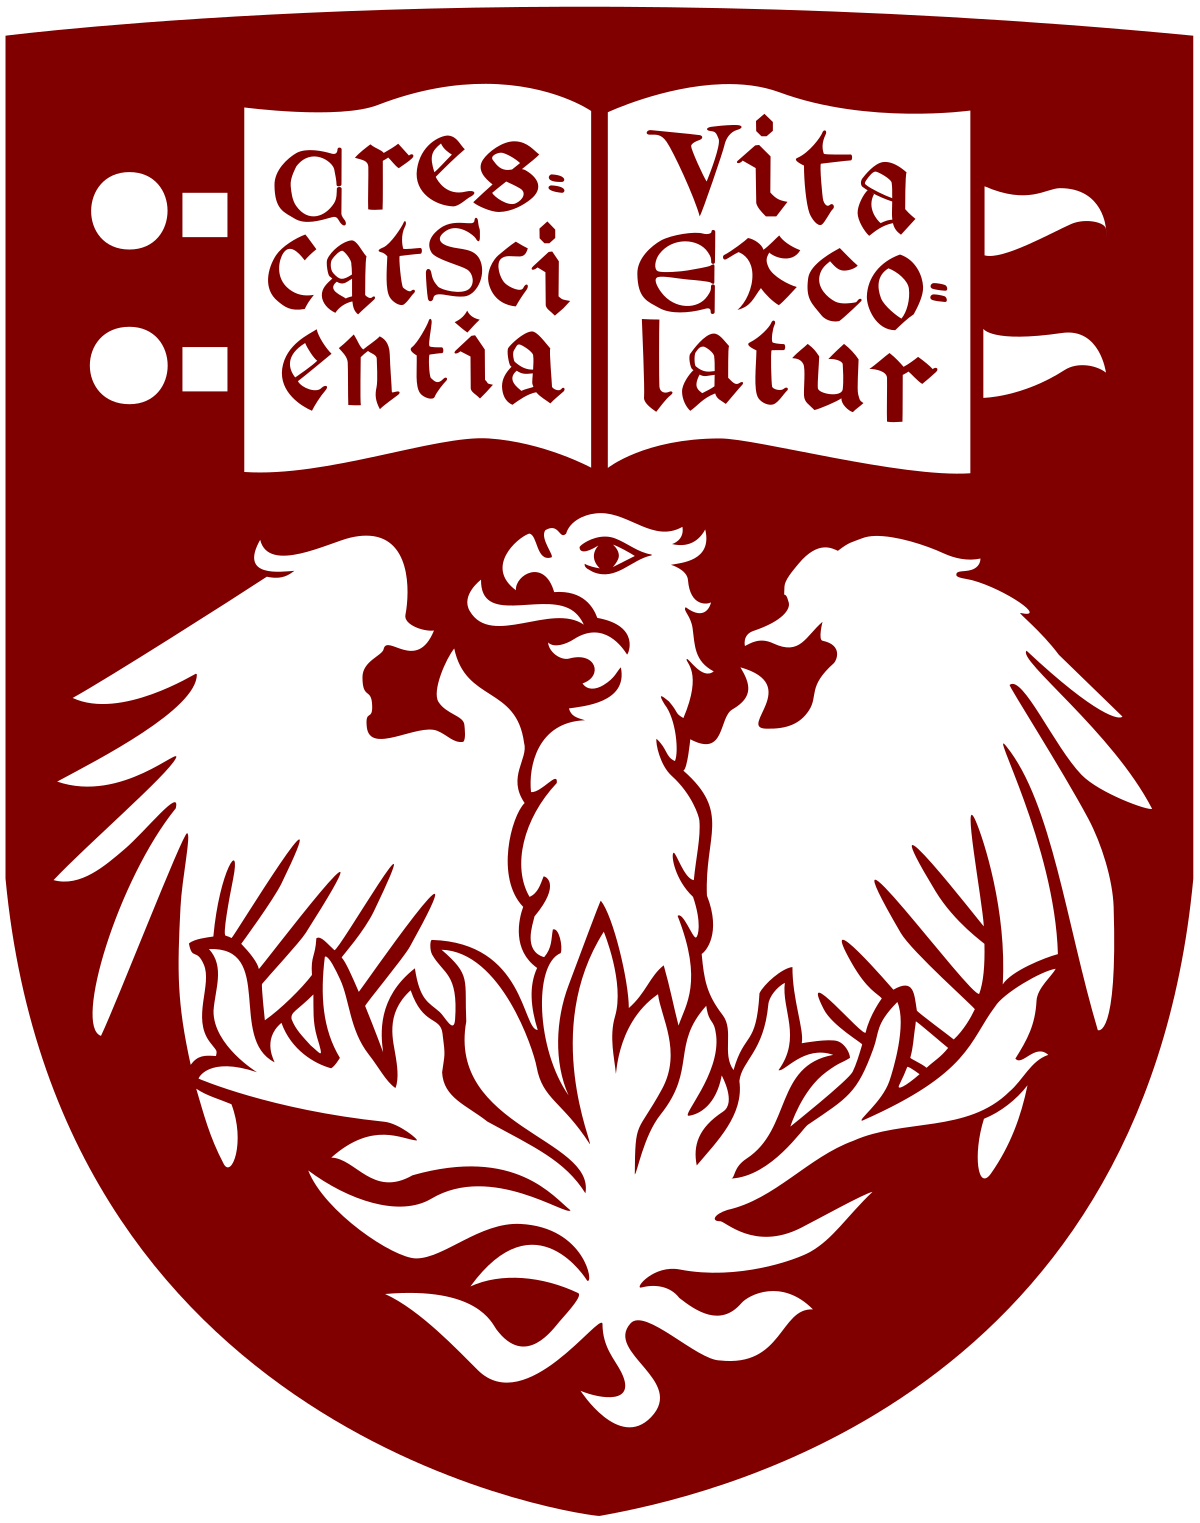 Well Known College Logo - University of Chicago